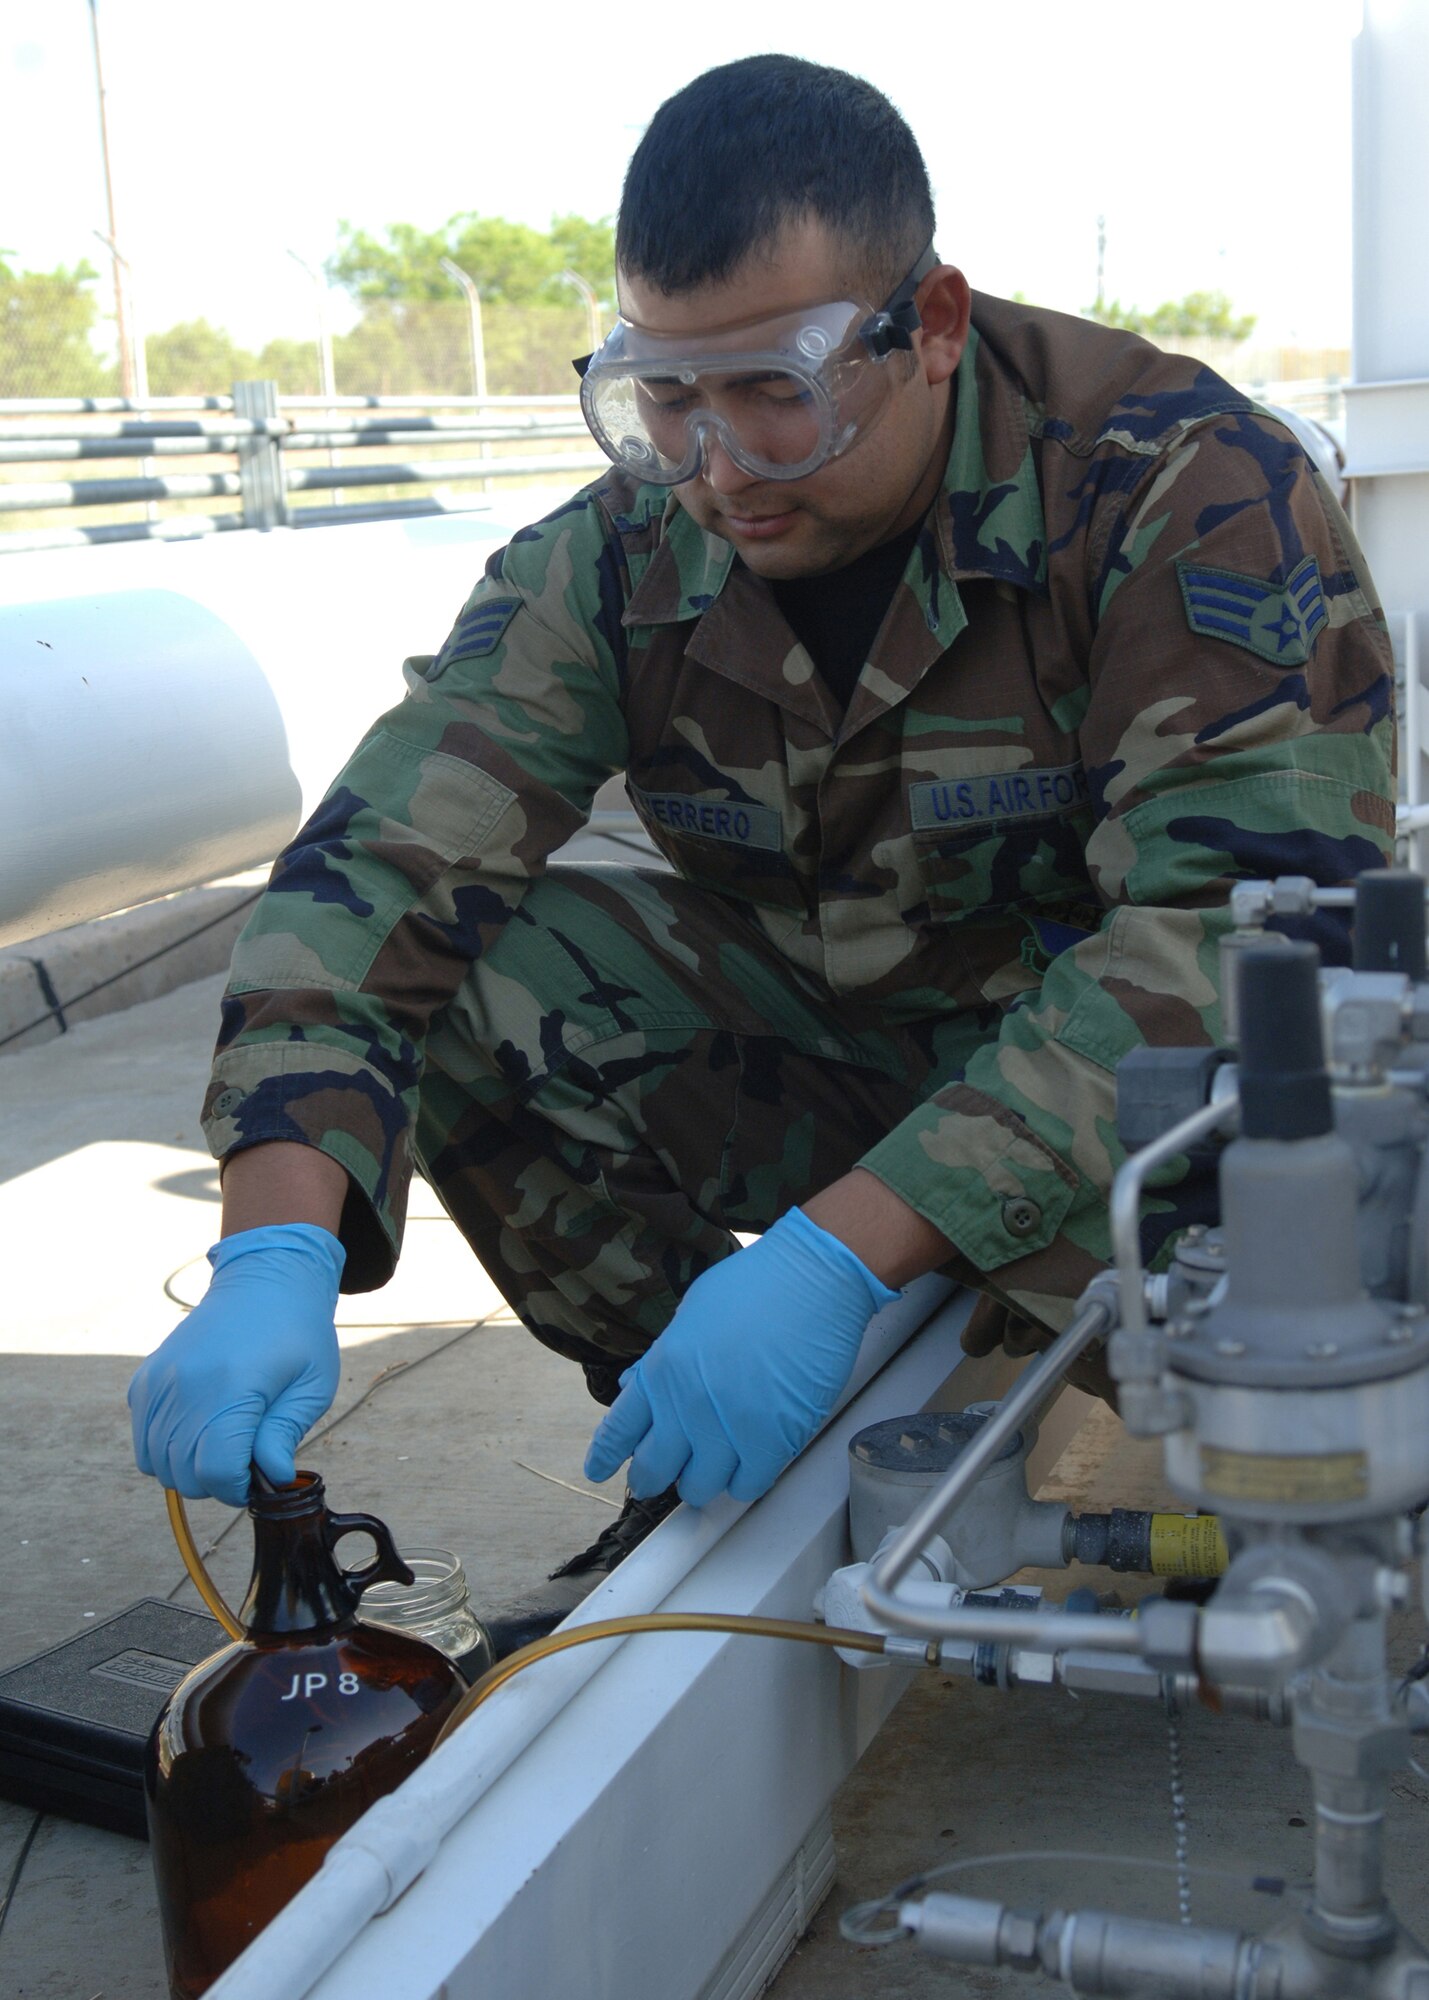 DYESS AIR FORCE BASE, Texas -- Senior Airman Rogelio Guerrero pumps a gallon of JP-8 fuel into a bottle, April 24. The fuel was pumped out to test the amount of sediment left in the fuel. (U.S. Air Force Photo by Airman 1st Class Micheal Breaux)